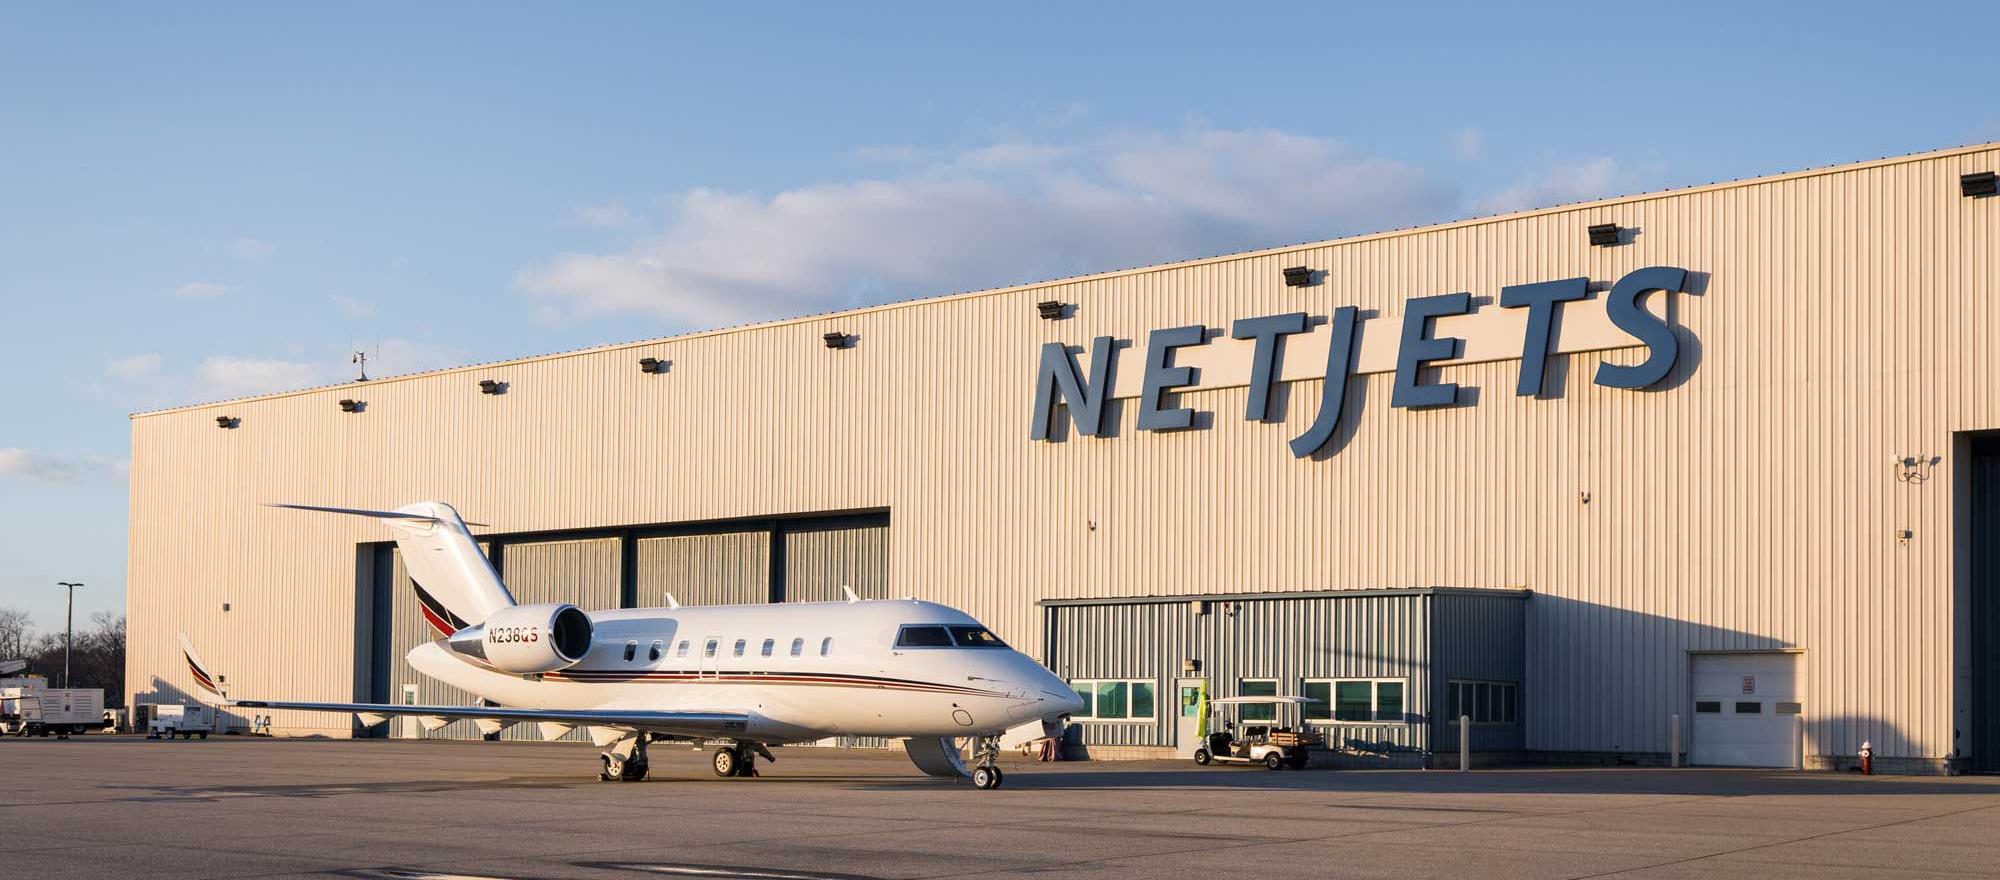 NetJets facility and Challenger 650 parked outside hangar